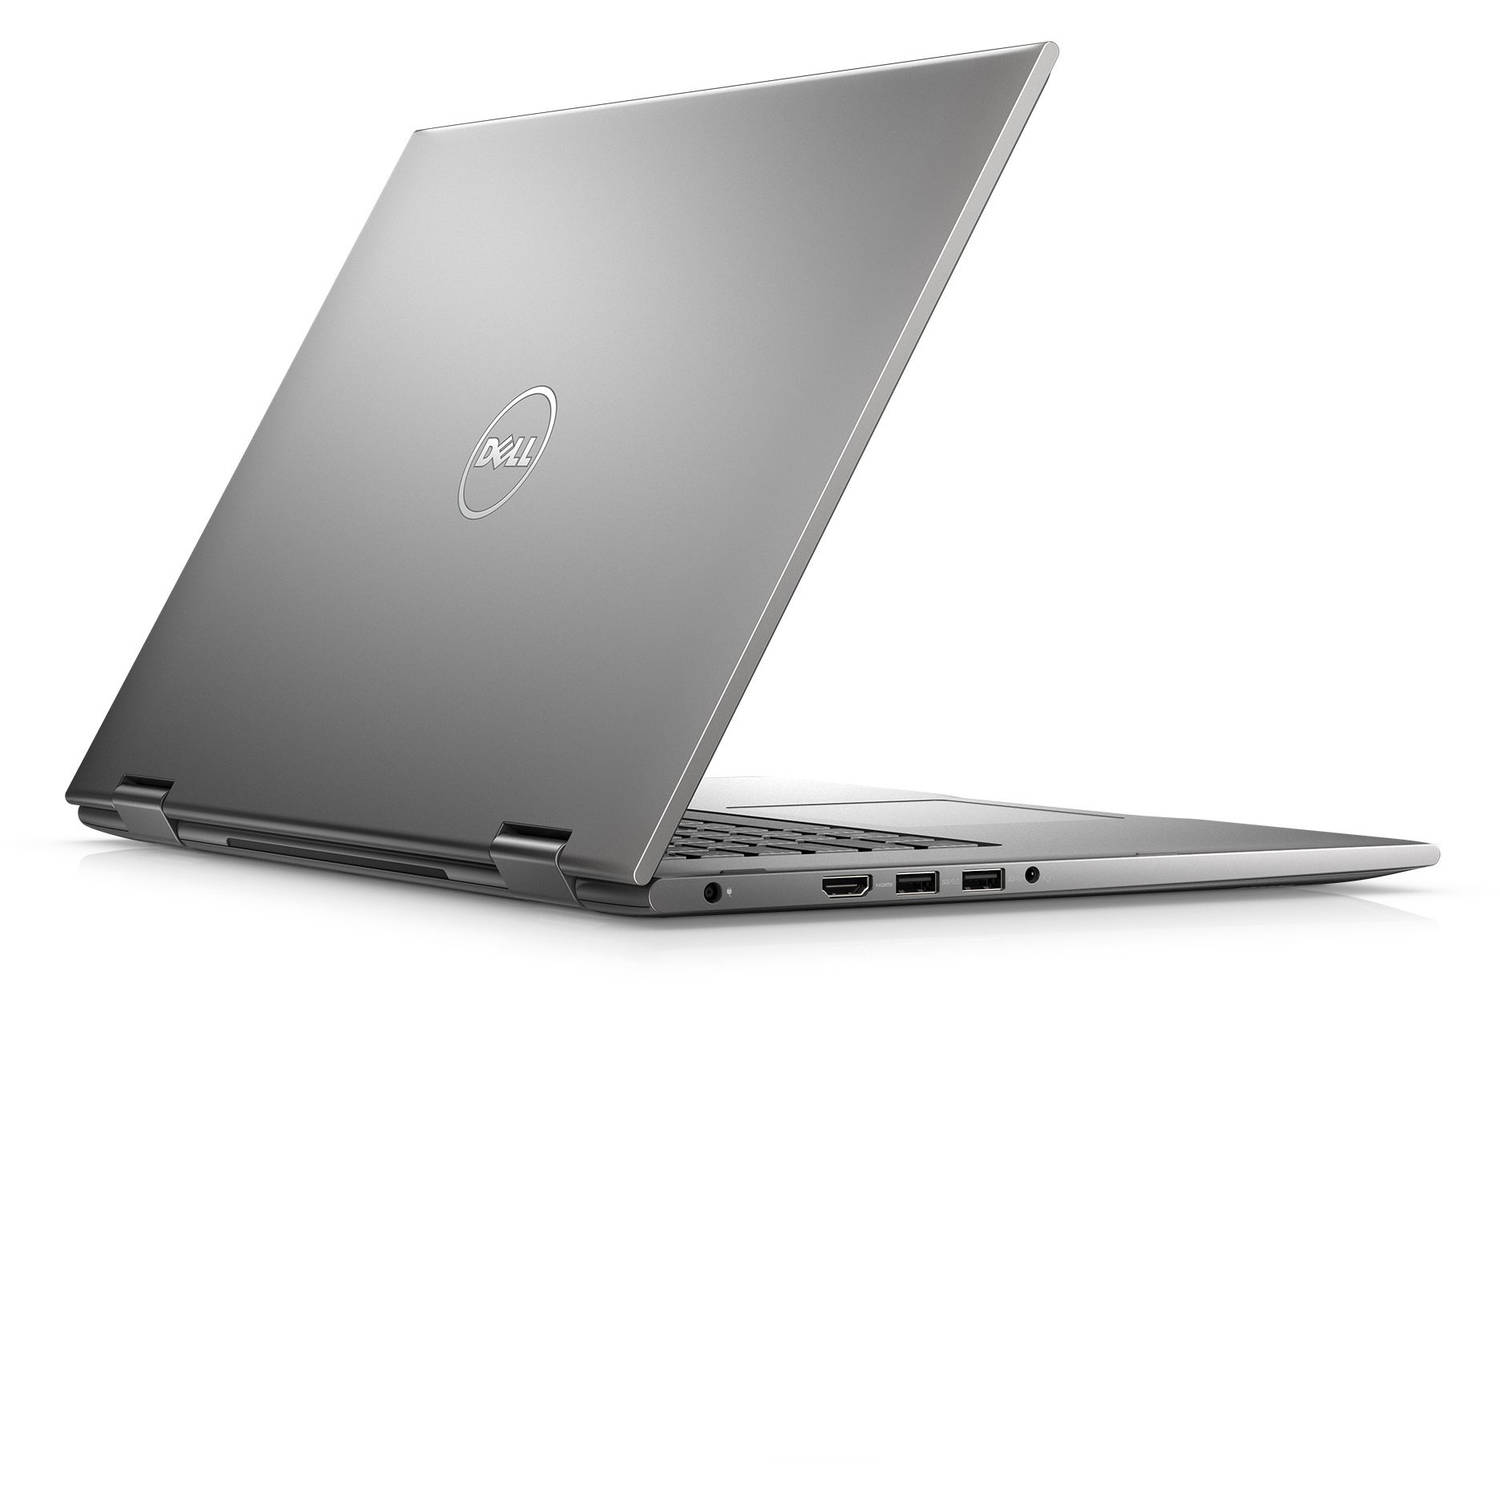 Inspiron 15 5000 5568 Notebook - image 4 of 12